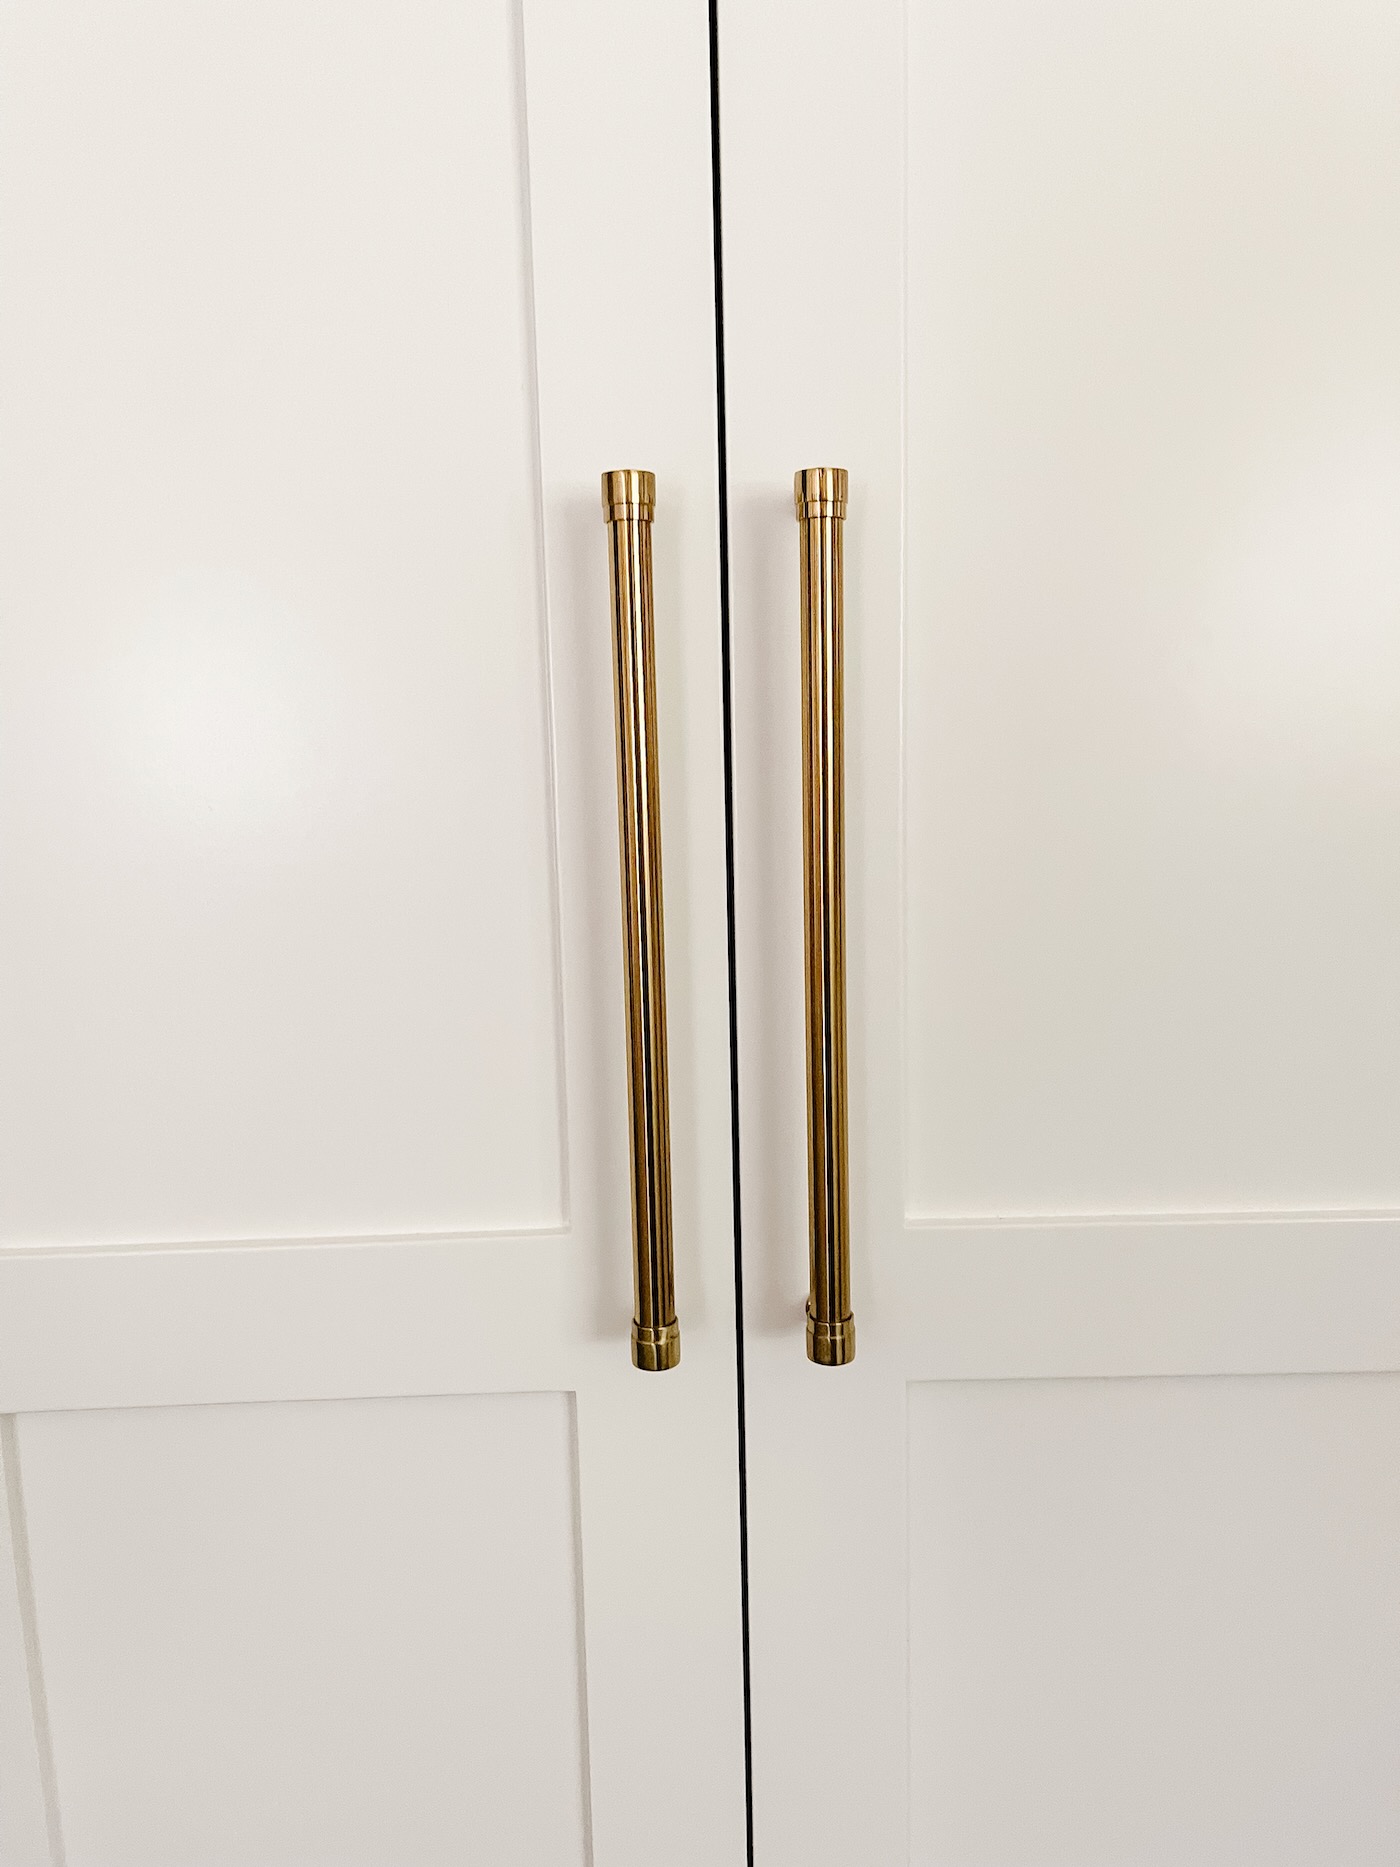 How to Pair Brass Hardware with Warm White Cabinets - Life Love Larson